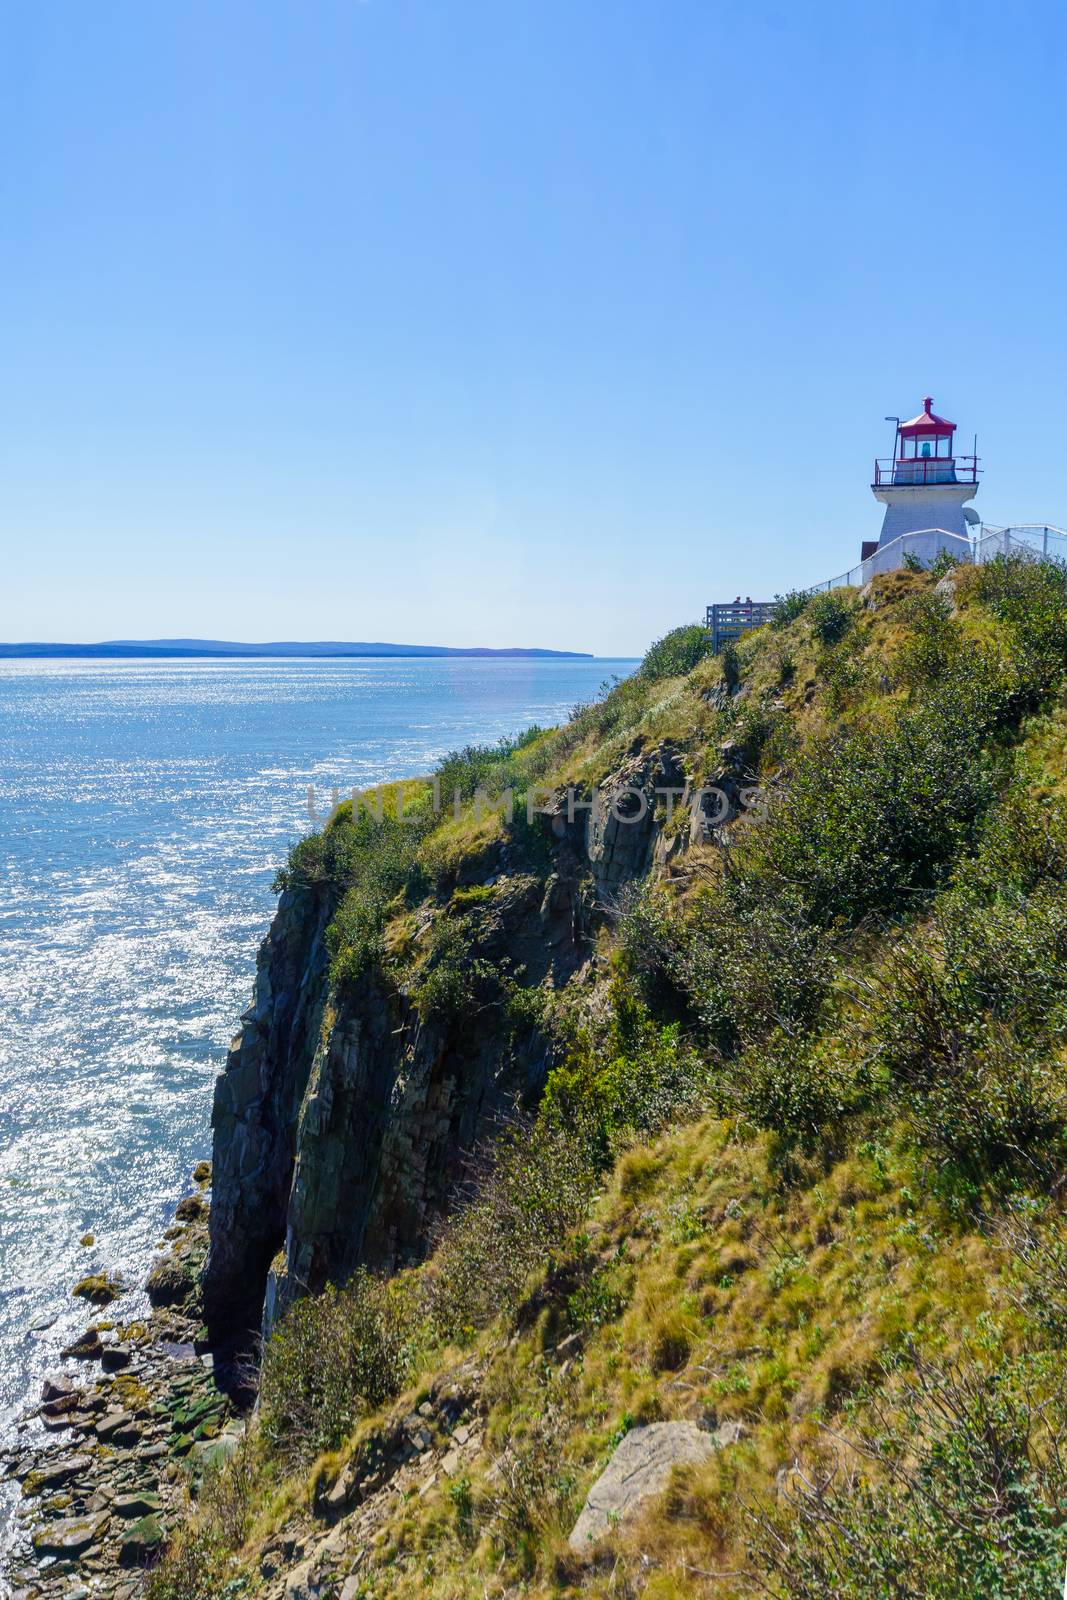 View of the Cape Enrage lighthouse, shoreline and cliffs, in New Brunswick, Canada